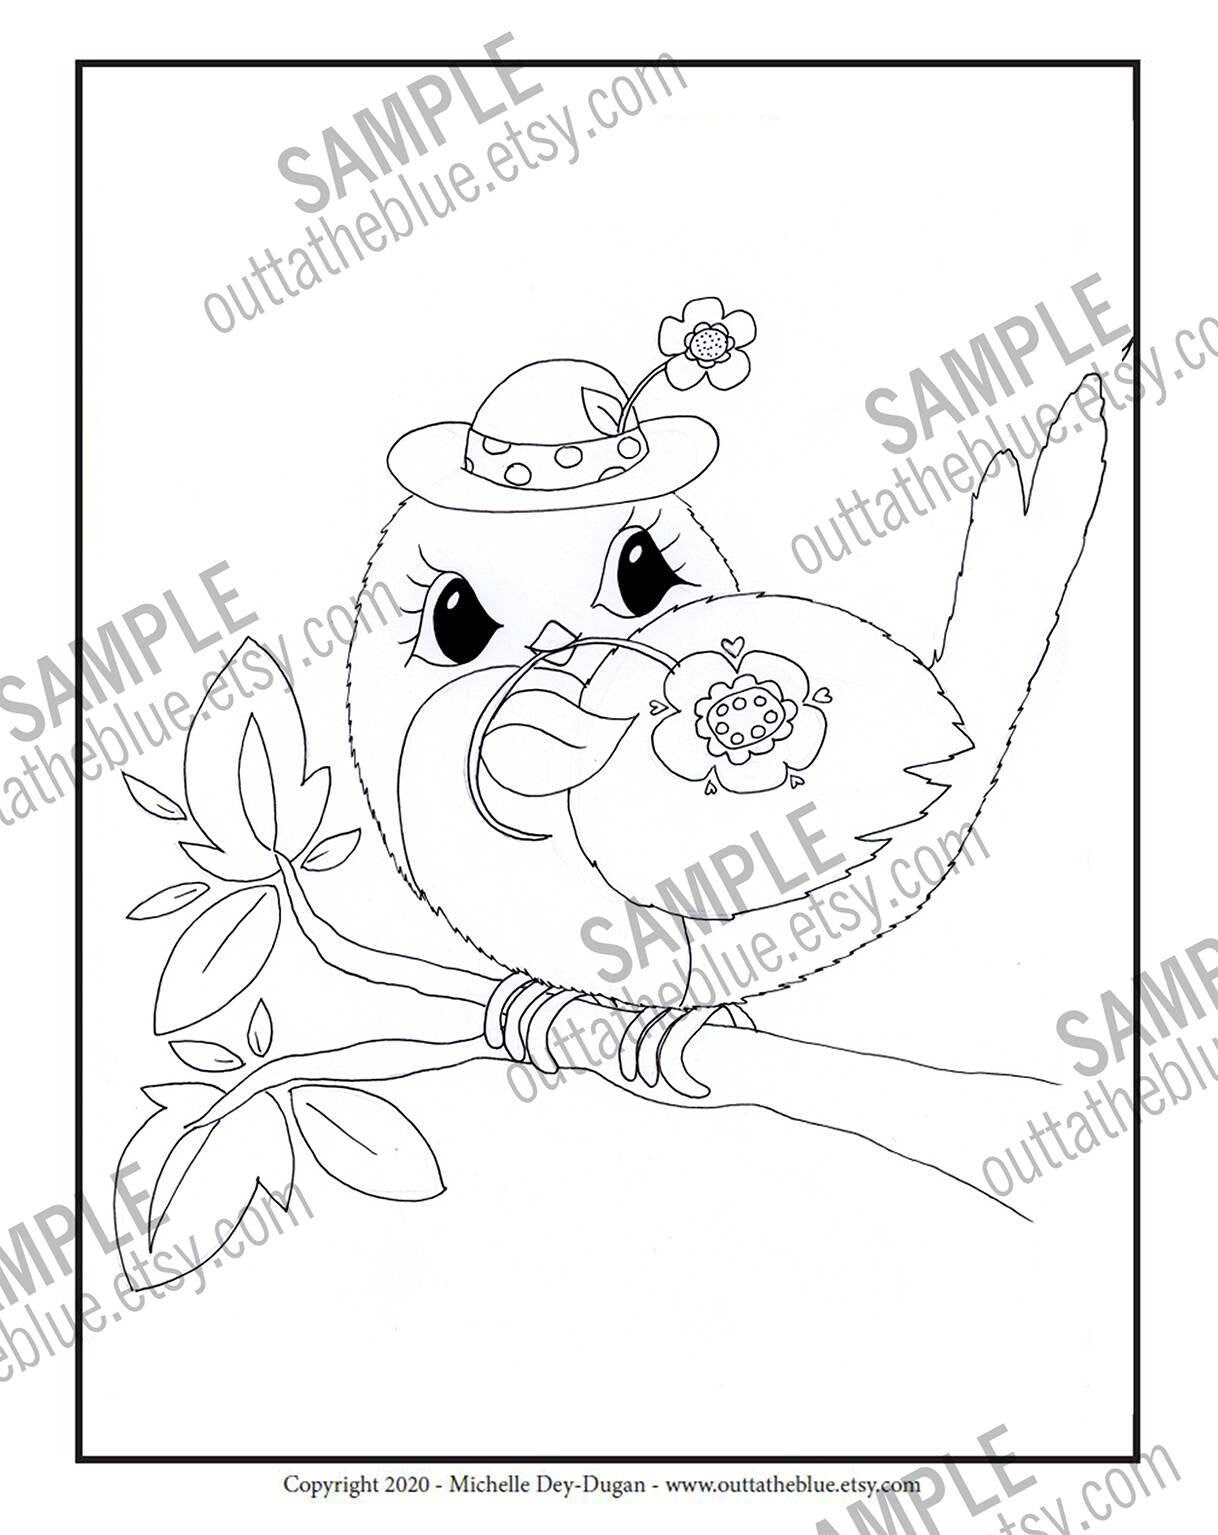 Woodland Whimsy Printable Coloring Pages for kids, digital upload PDF files, children's coloring sheets, animal pictures to color, 10 pages